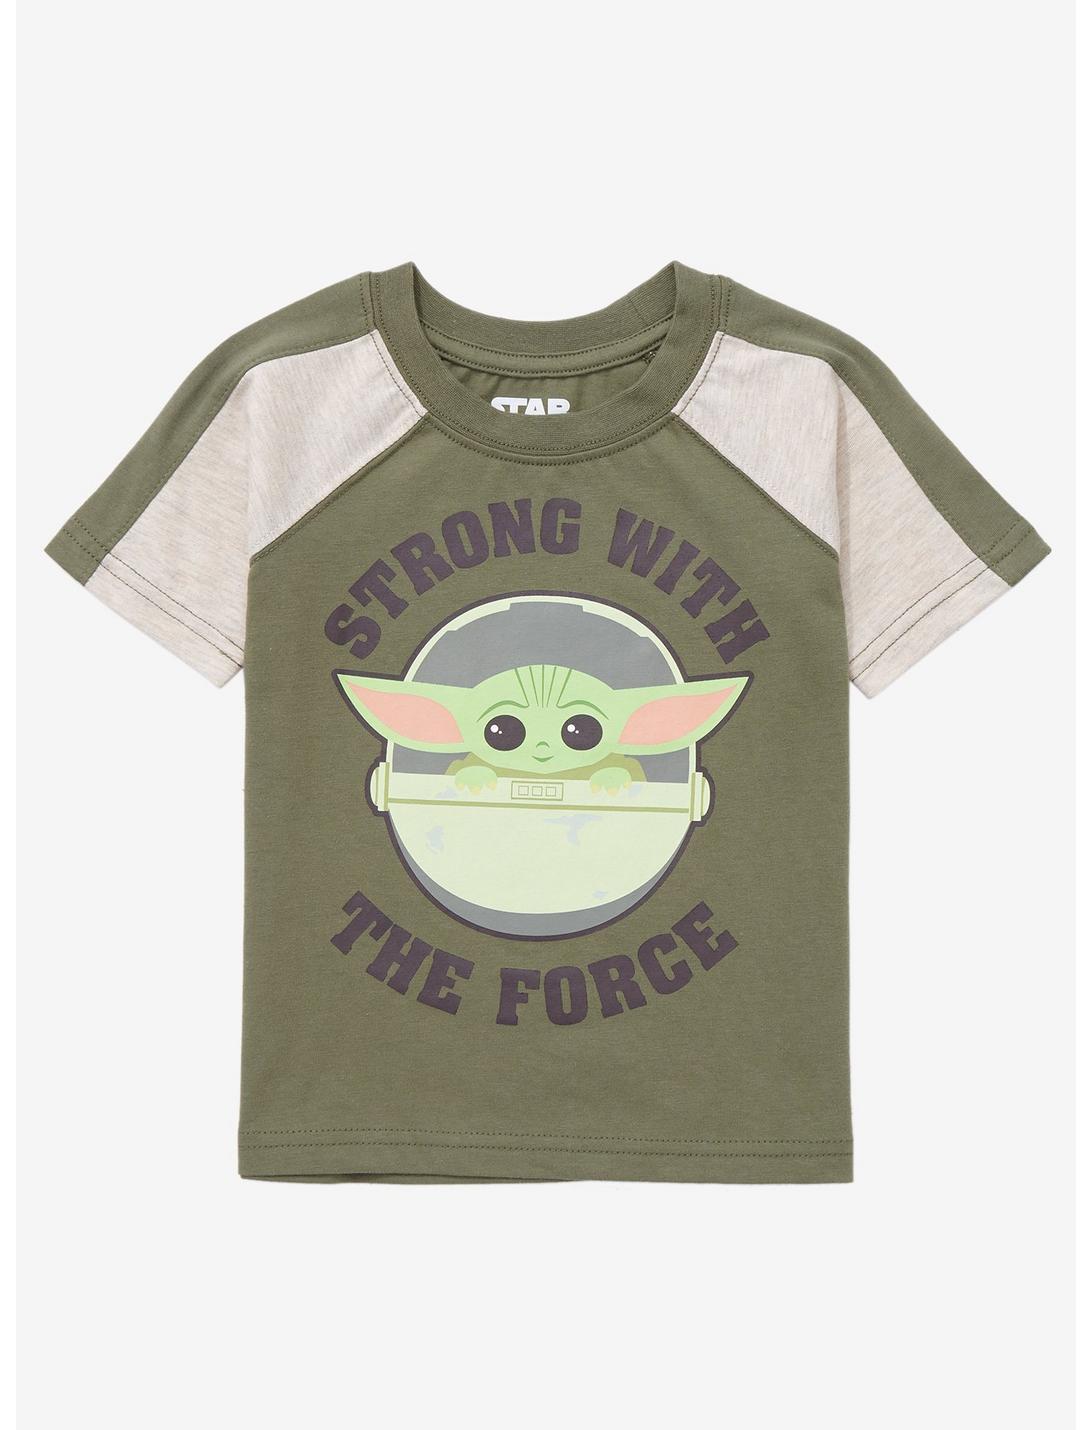 Star Wars The Mandalorian The Child Strong with the Force Toddler T-Shirt - BoxLunch Exclusive, OLIVE, hi-res